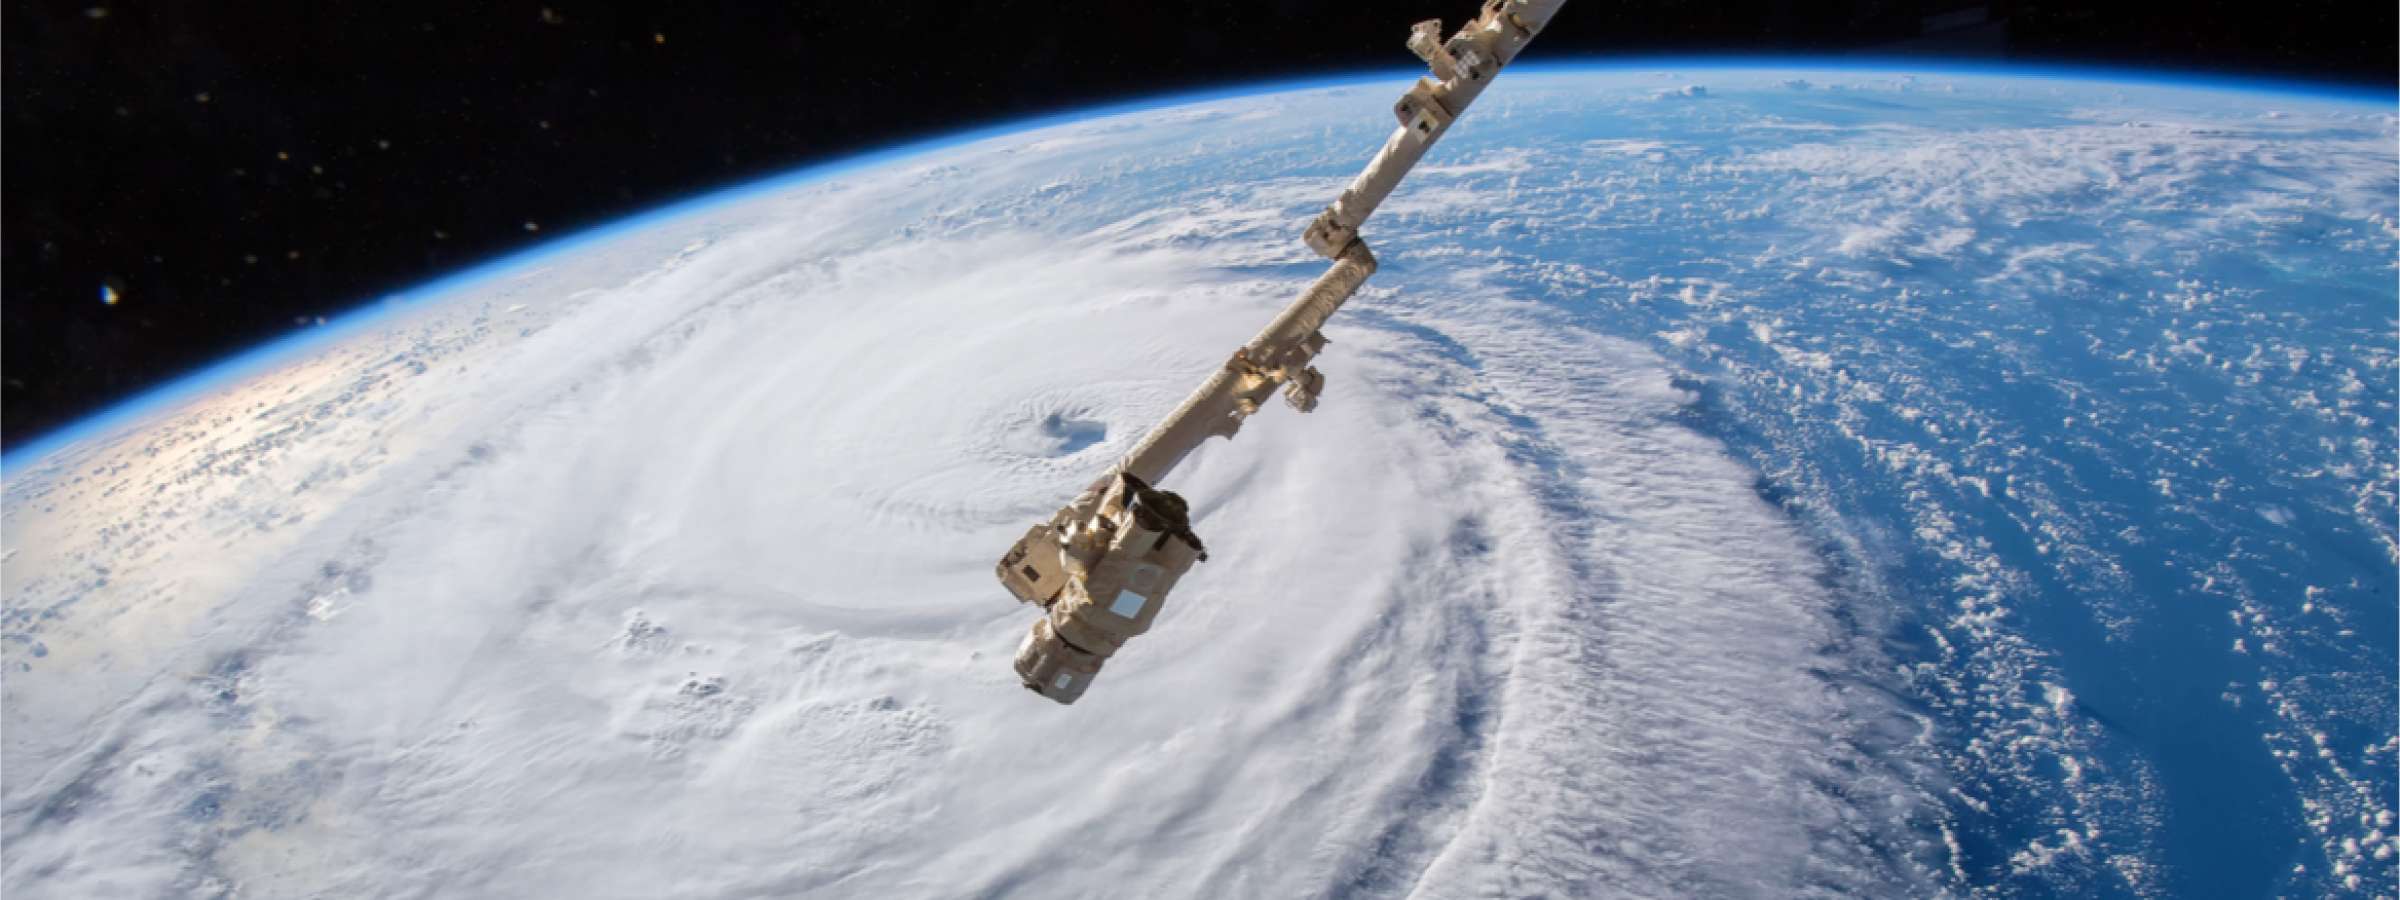 Hurricane Florence as photographed from space